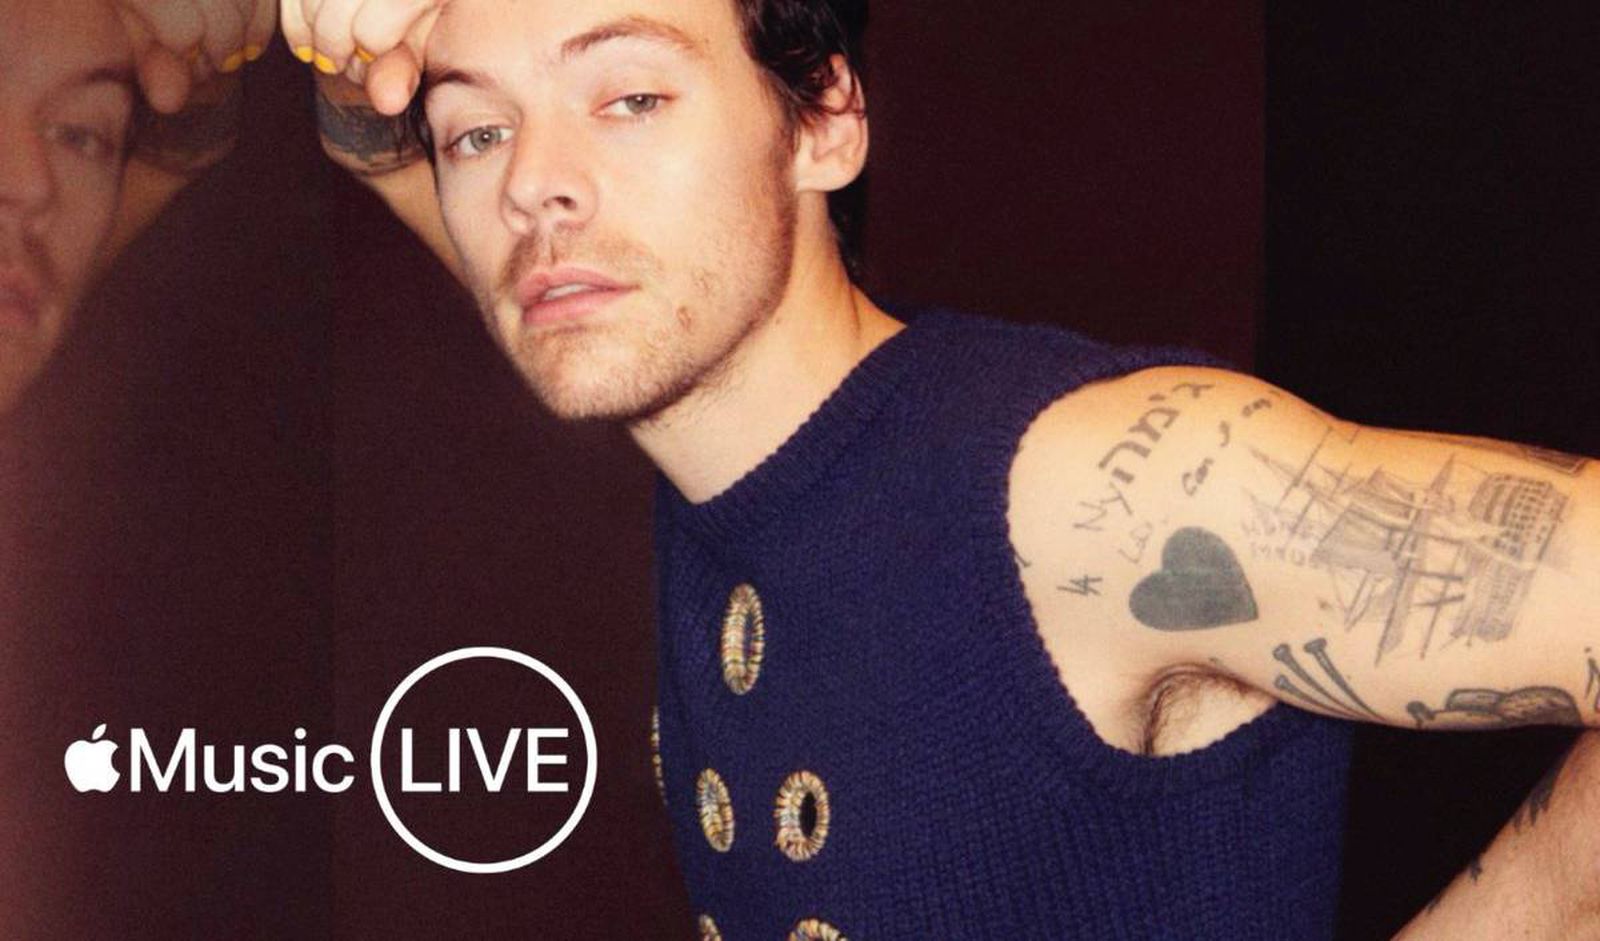 Apple Music to Livestream Select Concerts, Starting With Harry Styles This Friday - macrumors.com